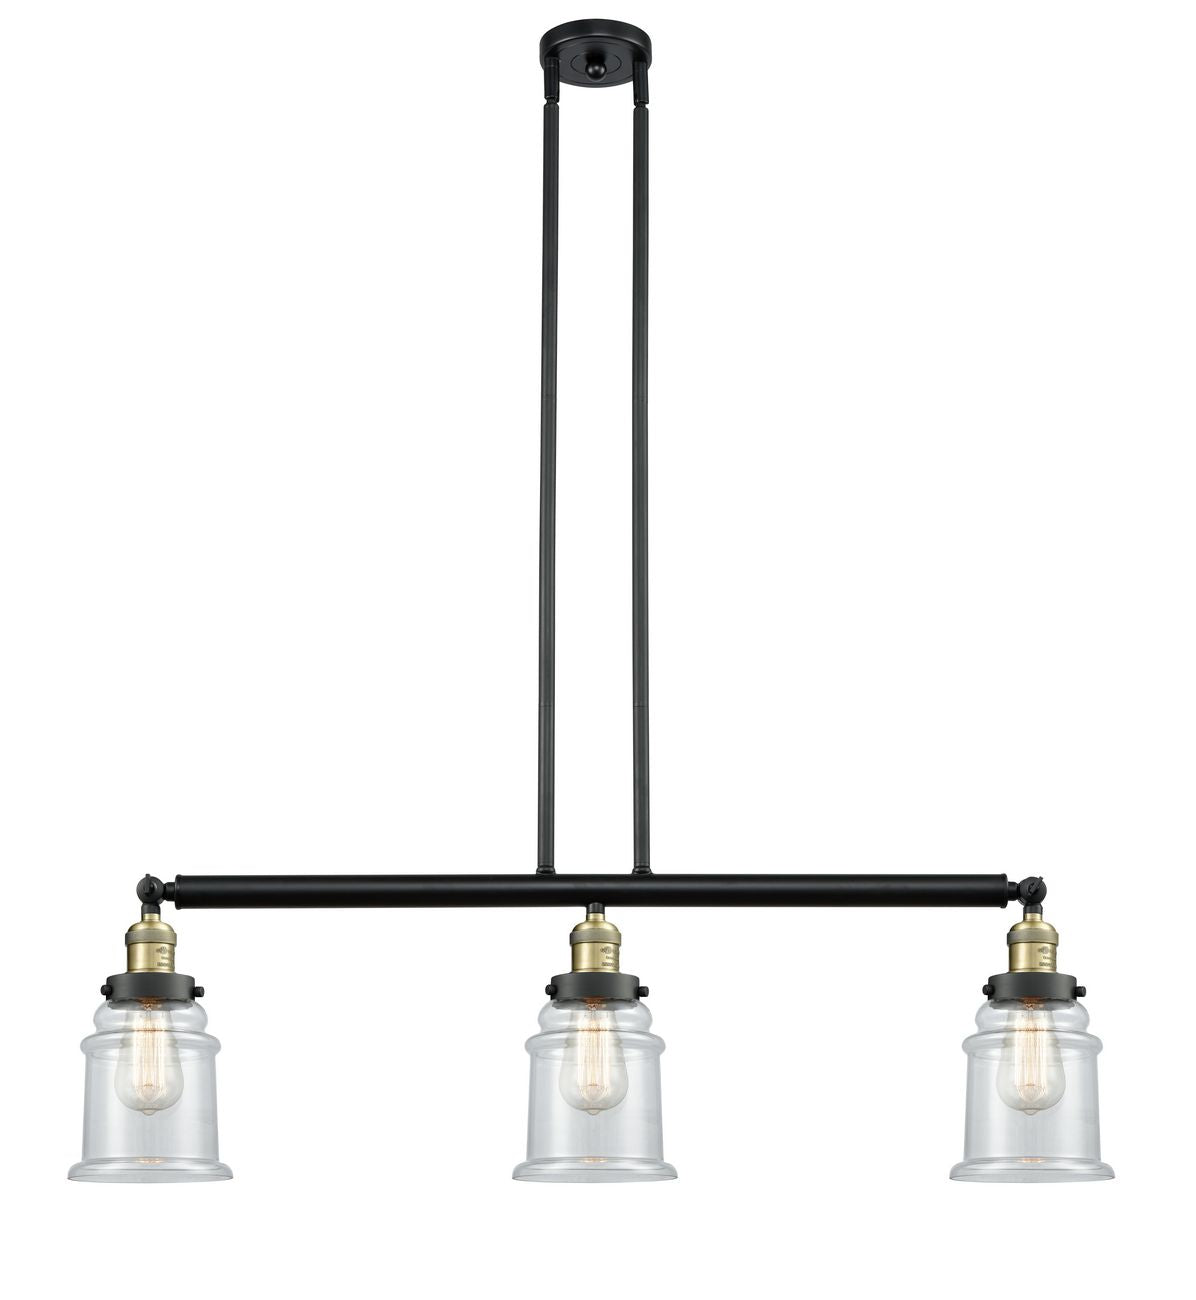 213-BAB-G182 3-Light 38.5" Black Antique Brass Island Light - Clear Canton Glass - LED Bulb - Dimmensions: 38.5 x 6 x 11<br>Minimum Height : 21.5<br>Maximum Height : 45.5 - Sloped Ceiling Compatible: Yes